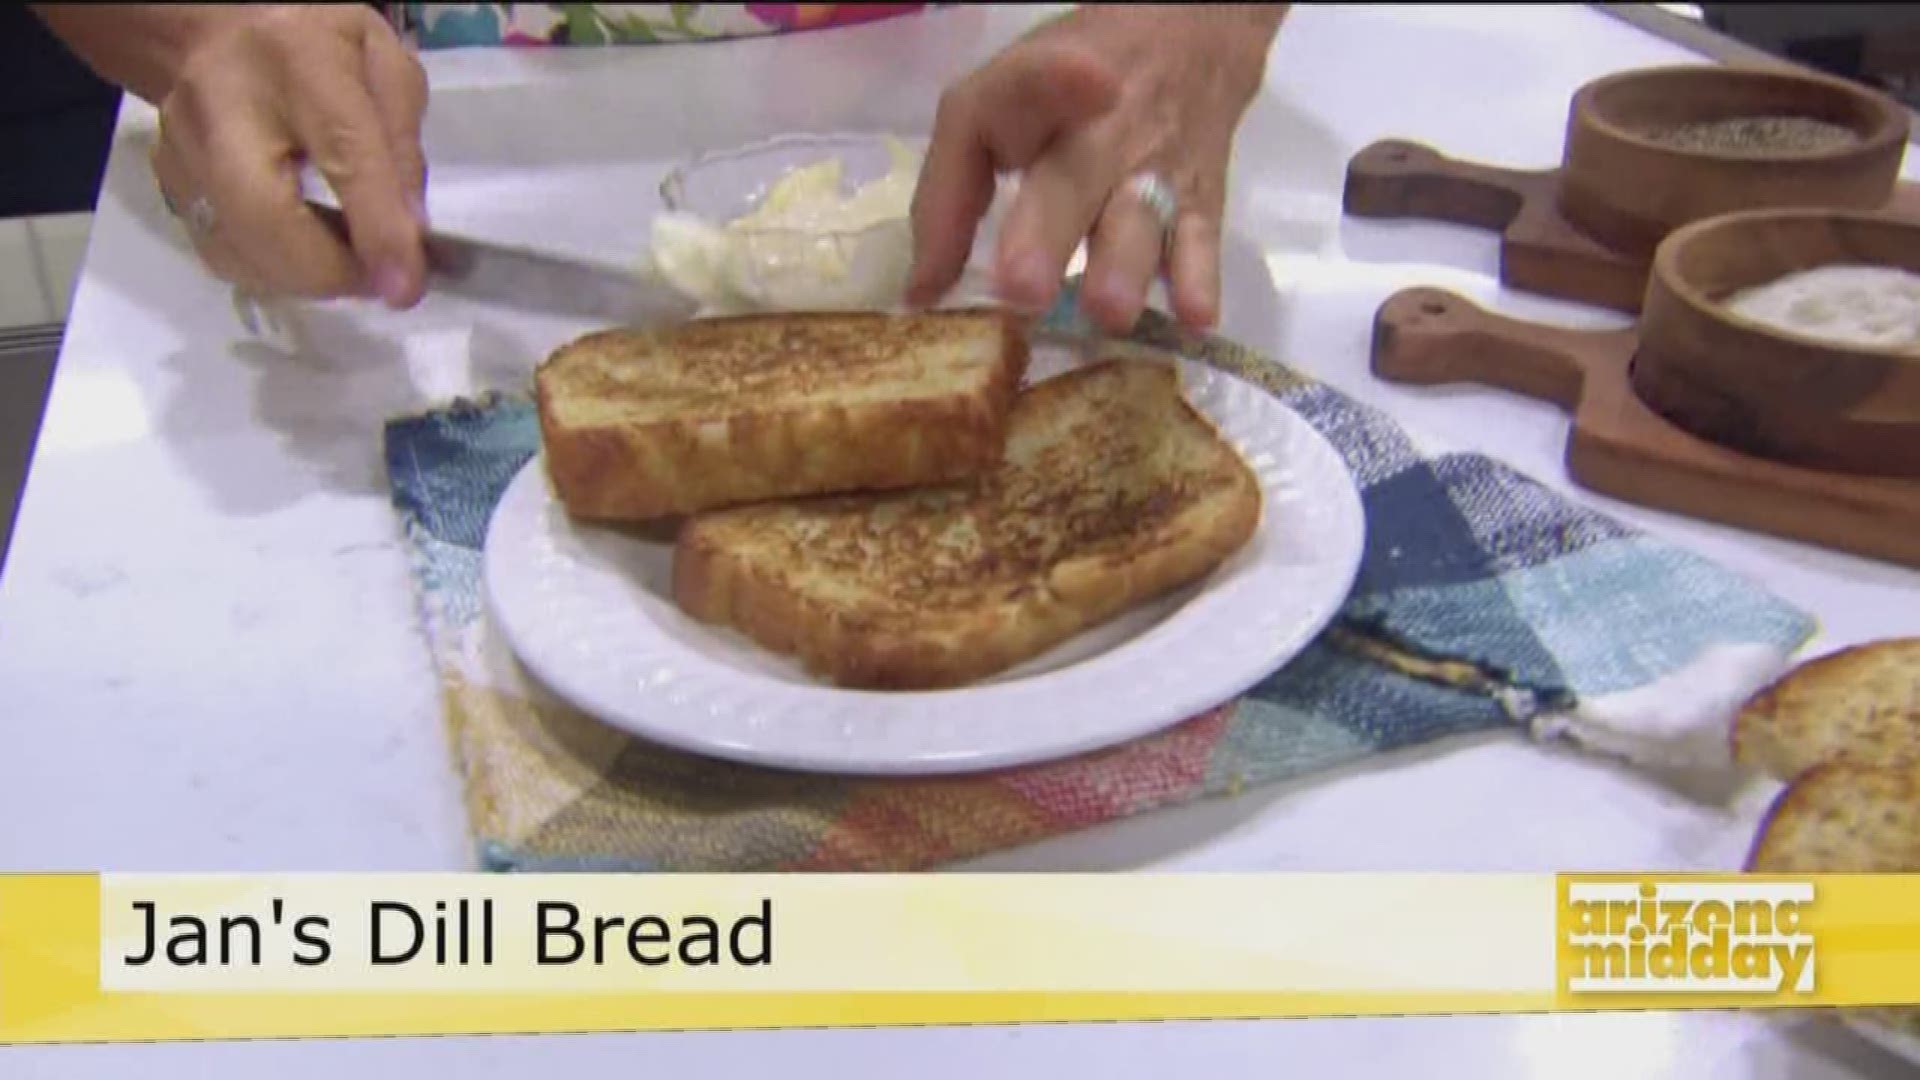 Jan shows us how to make homemade dill bread perfect for a tomato sandwich!